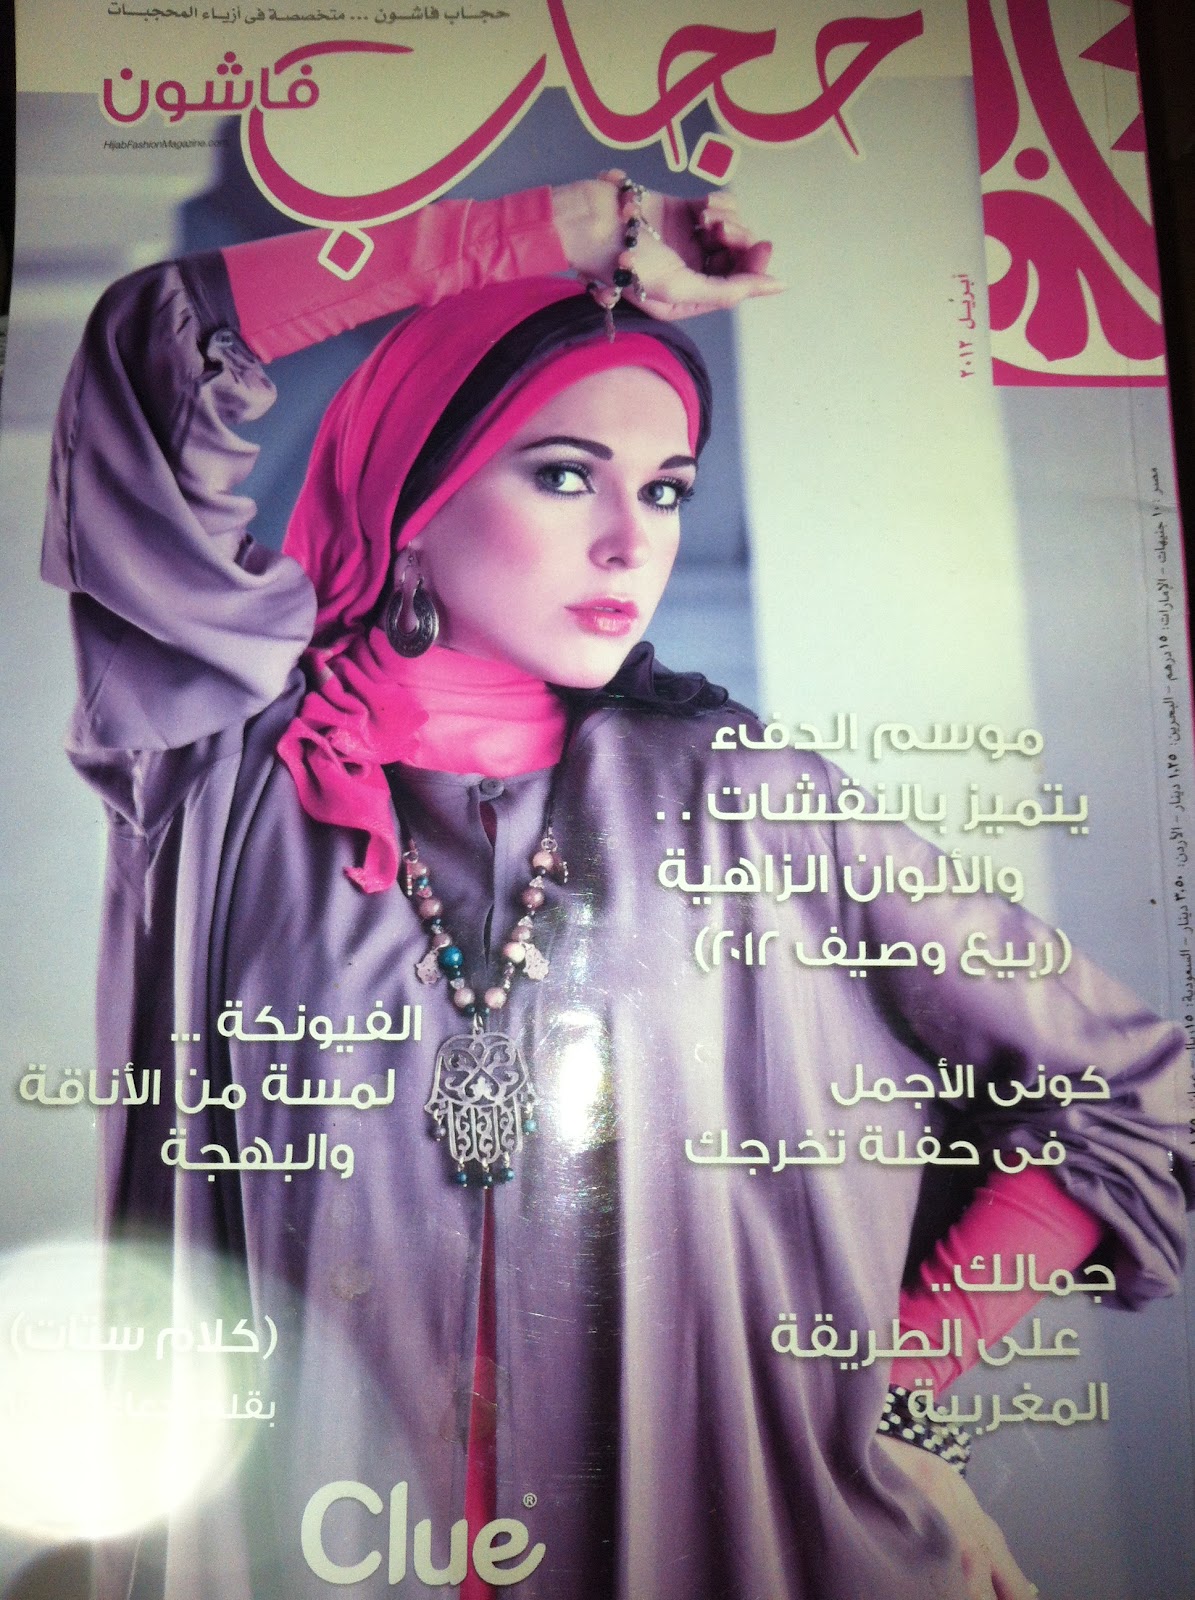 Download this Hijab Fashion Magazine... picture